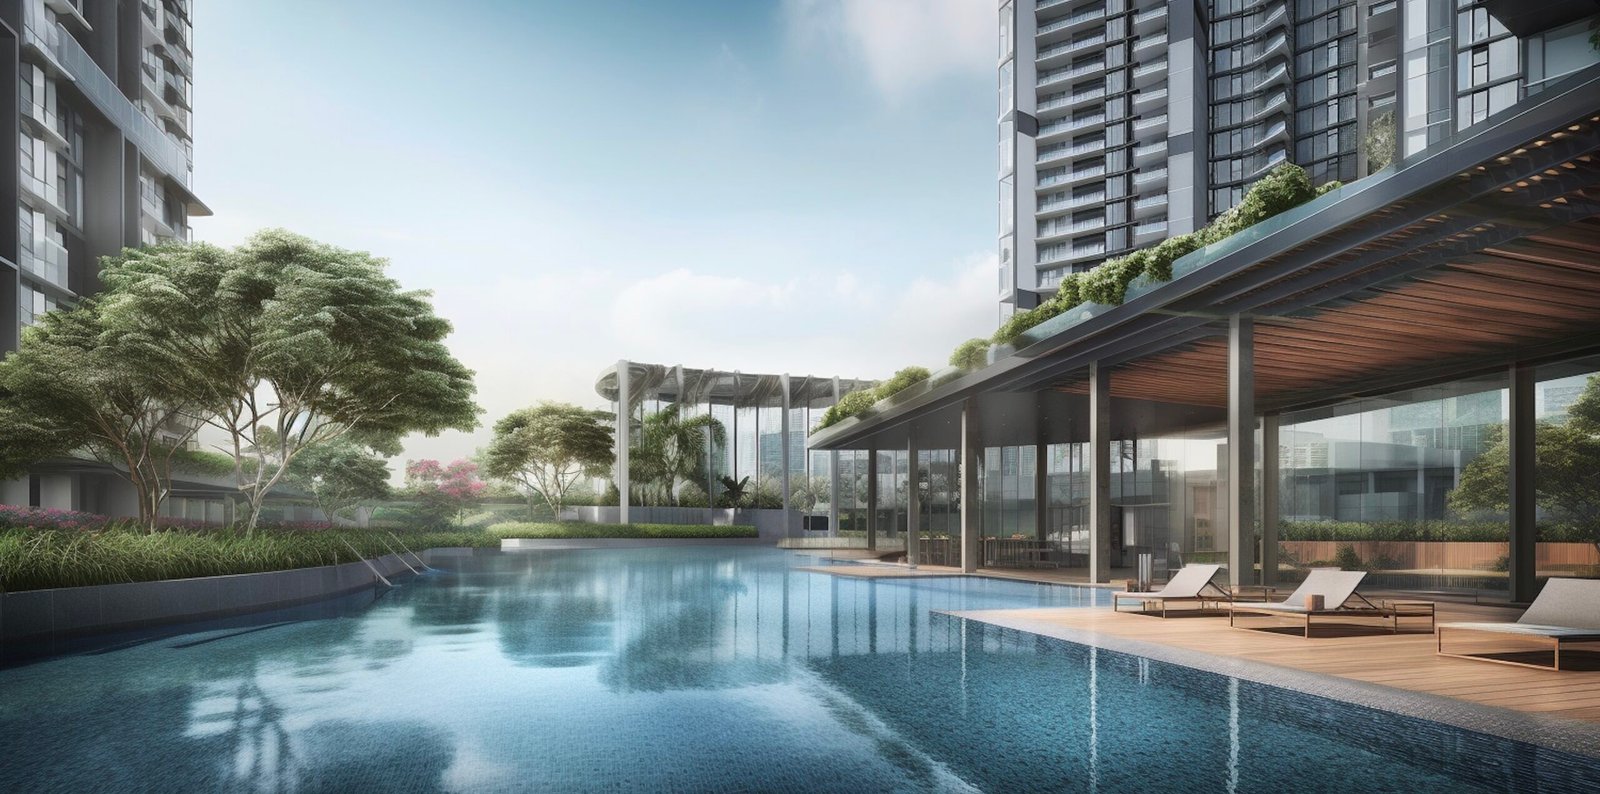 Tampines Ave 11 Mix Development: Unbeatable Mix of Comfort, Convenience & Lifestyle Choices for Shopaholics and Foodies Alike